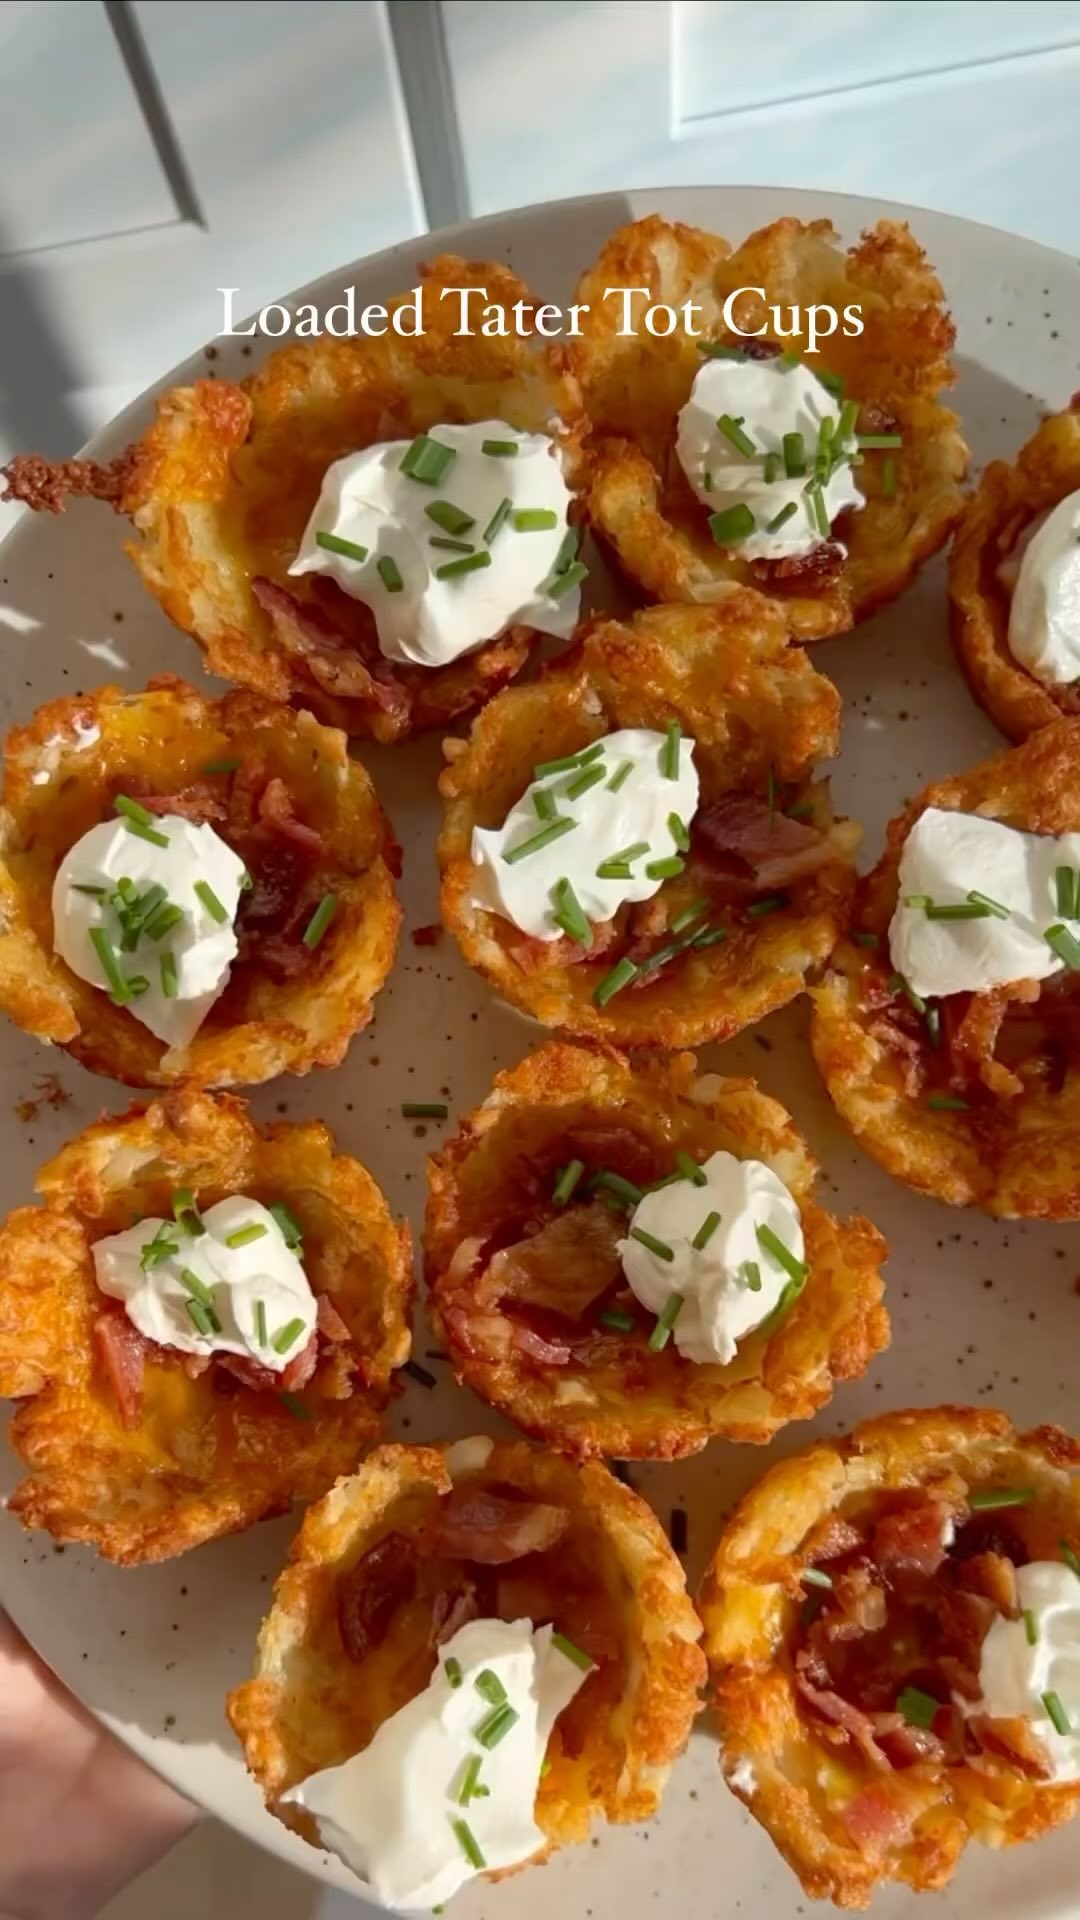 Loaded tater tot cups w/ shredded cheese